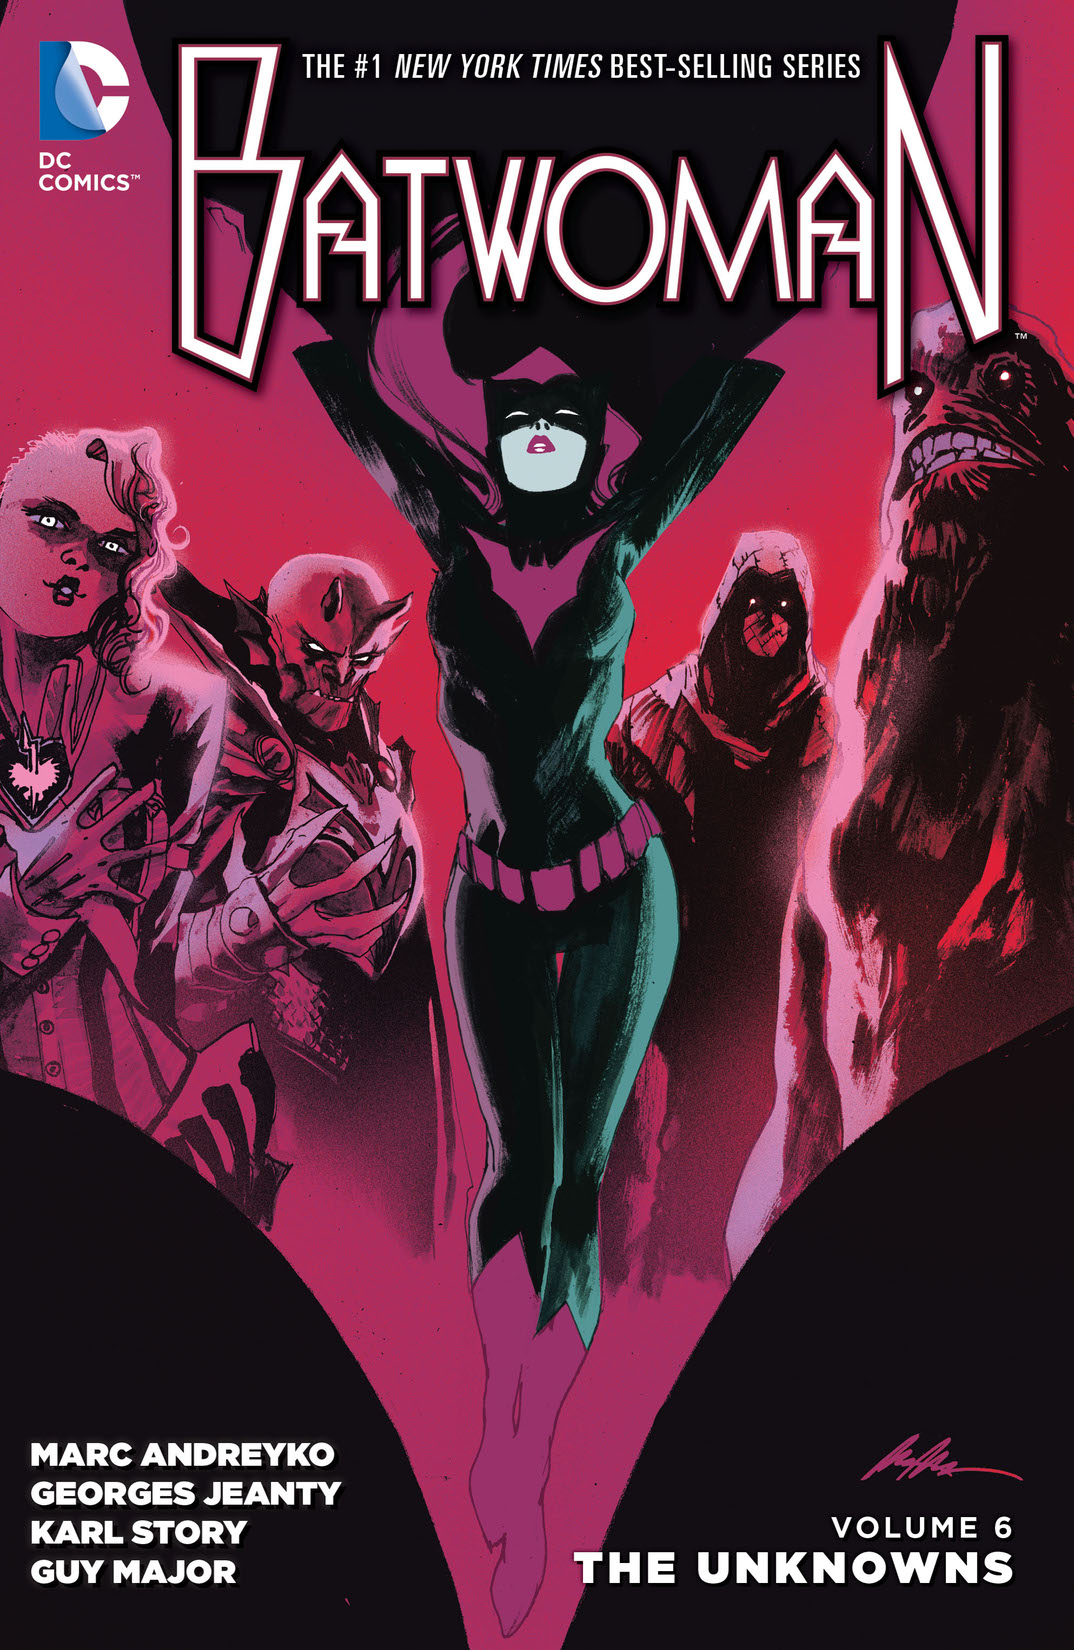 Batwoman Vol. 6: The Unknowns preview images